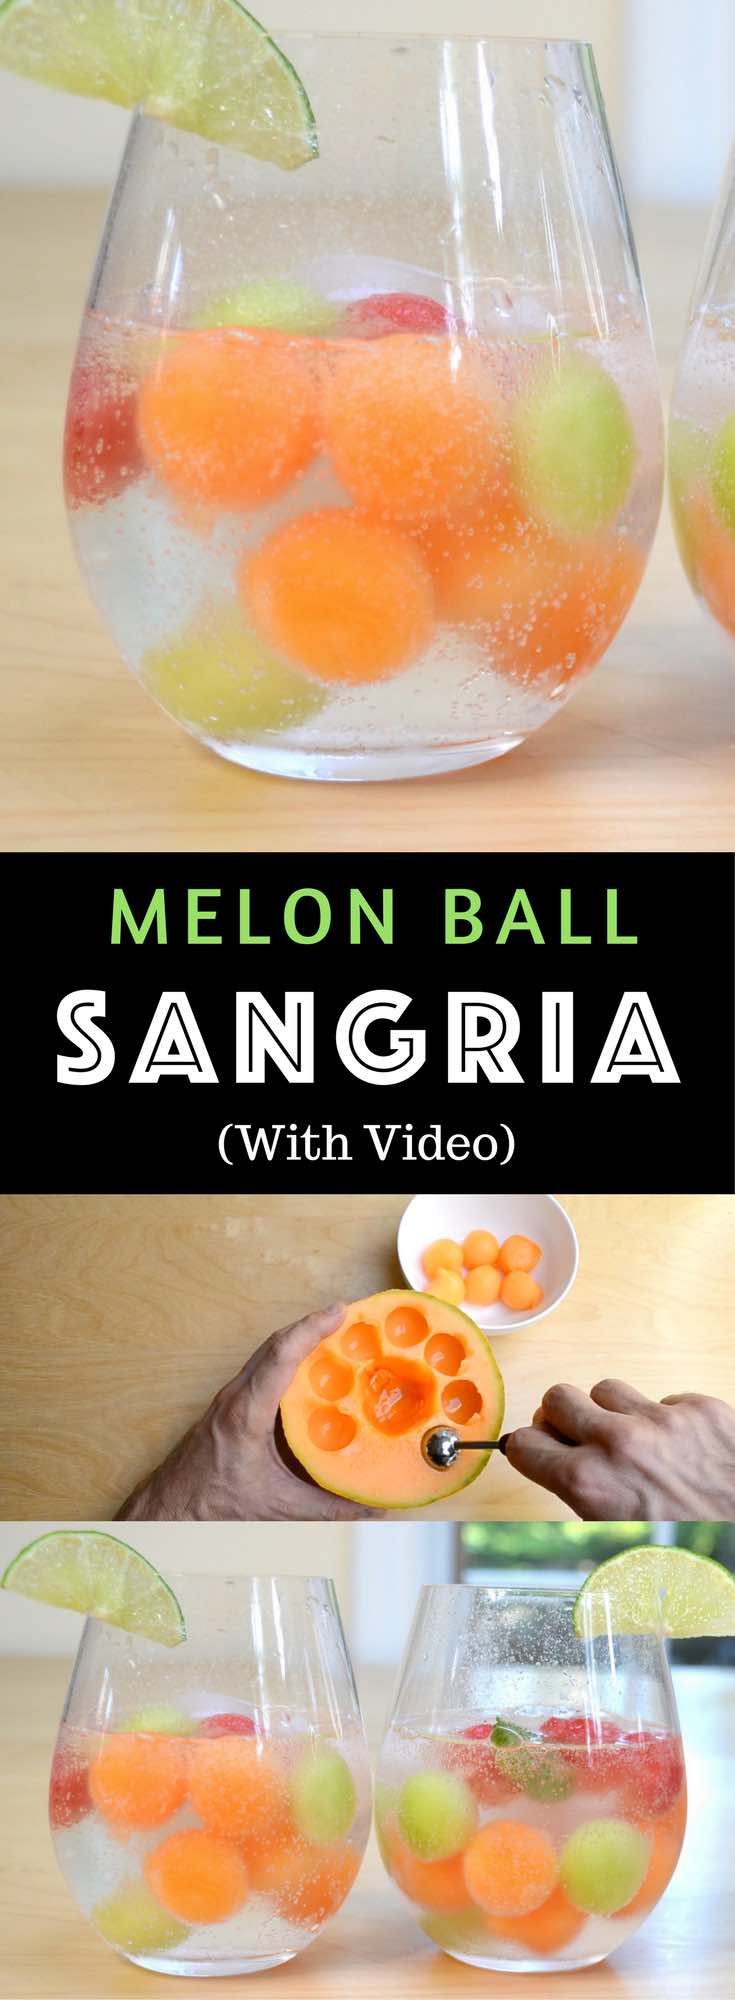 Easy Melon Ball Sangria – Refreshing and delicious melon ball sangria, the most beautiful sangria recipe! All you need is only a few ingredients: watermelon, cantaloupe and honeydew melons, moscato wine, sugar, lime, and sparkling water. Easy drinks recipe. Video recipe. | Tipbuzz.com